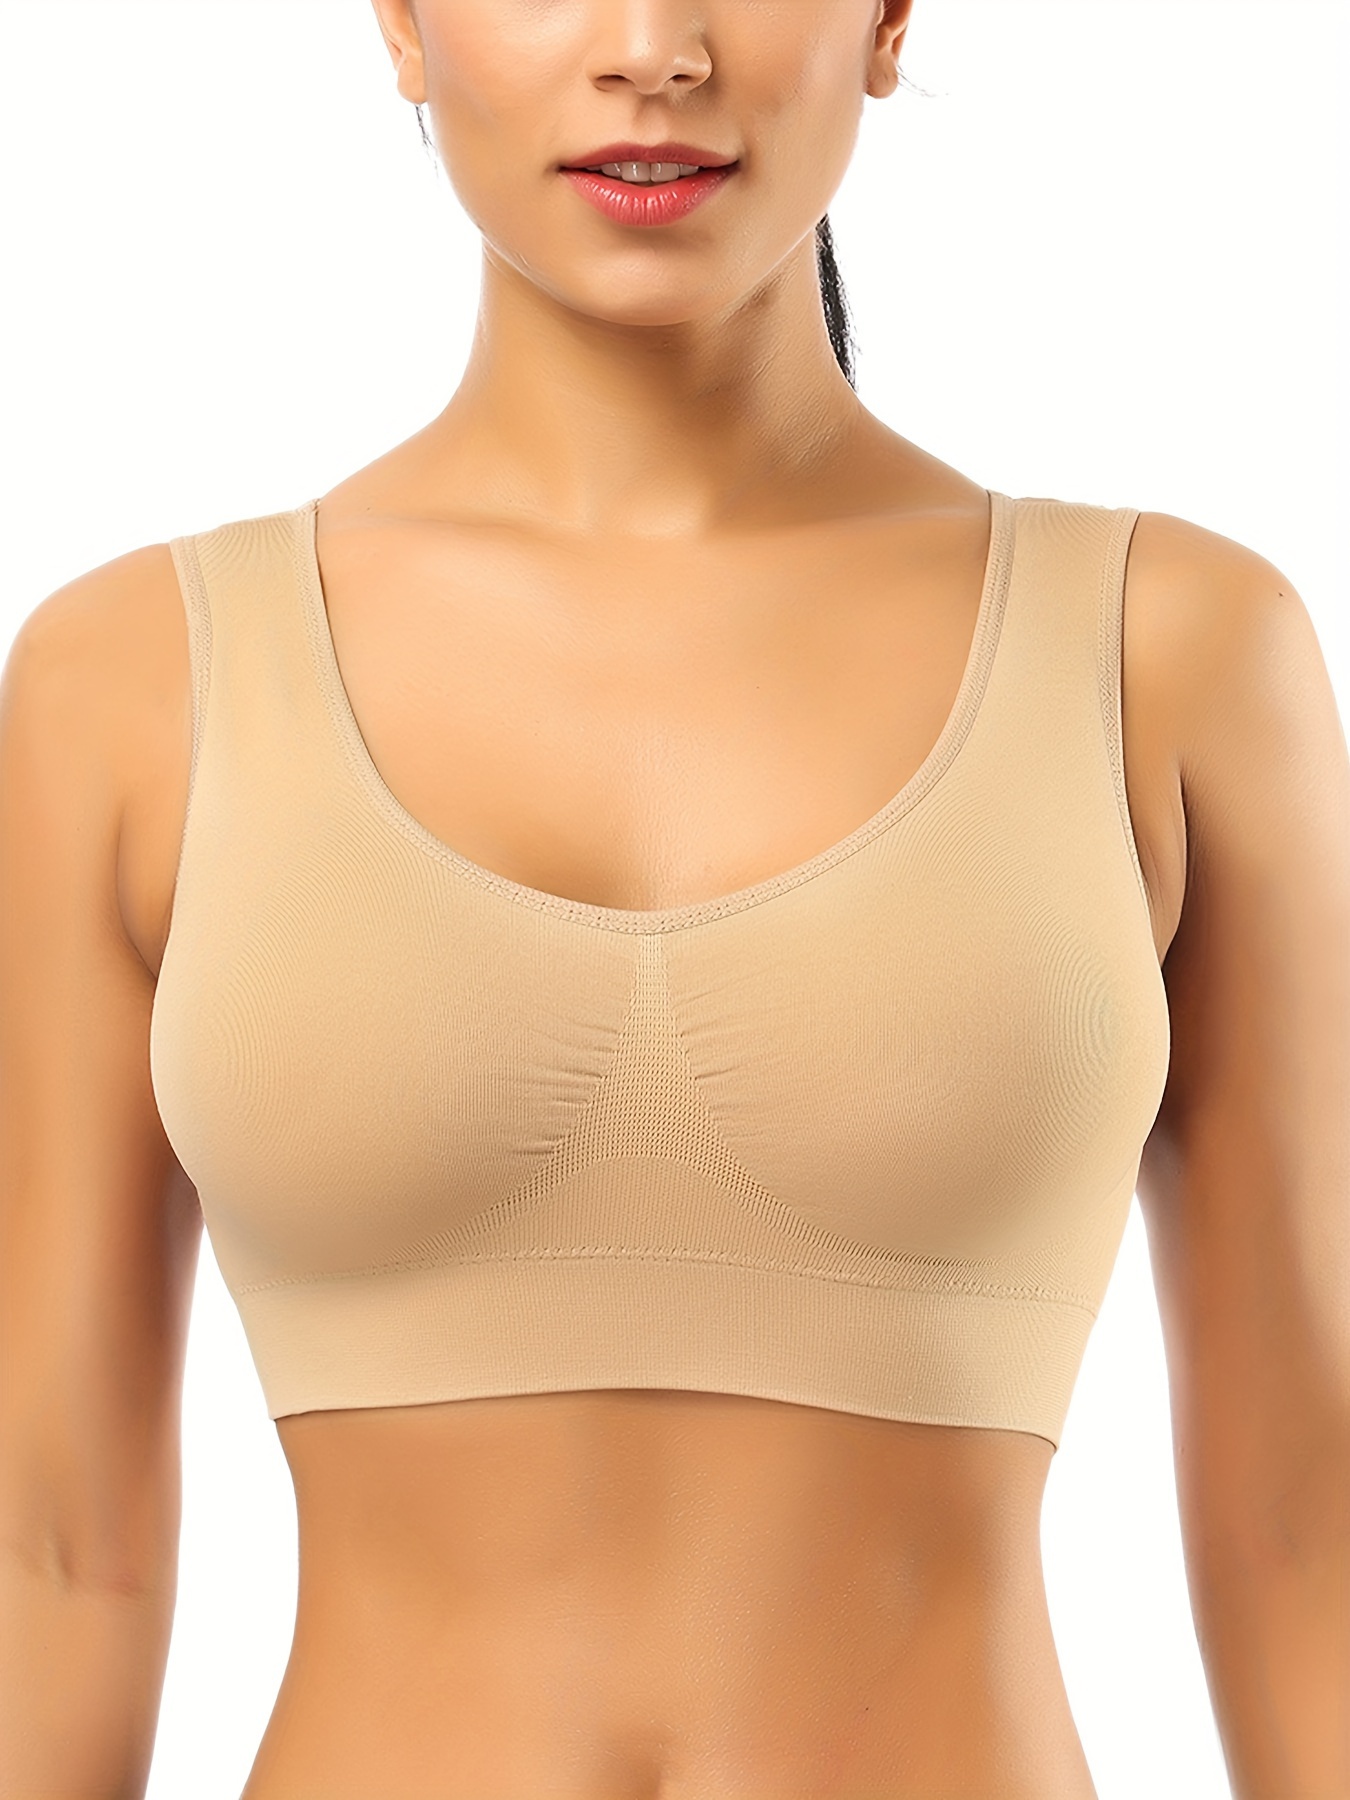 1pc Women's Front Closure Sports Bra Without Steel Ring, Adjustable,  Breathable, Comfortable, For Running And Yoga